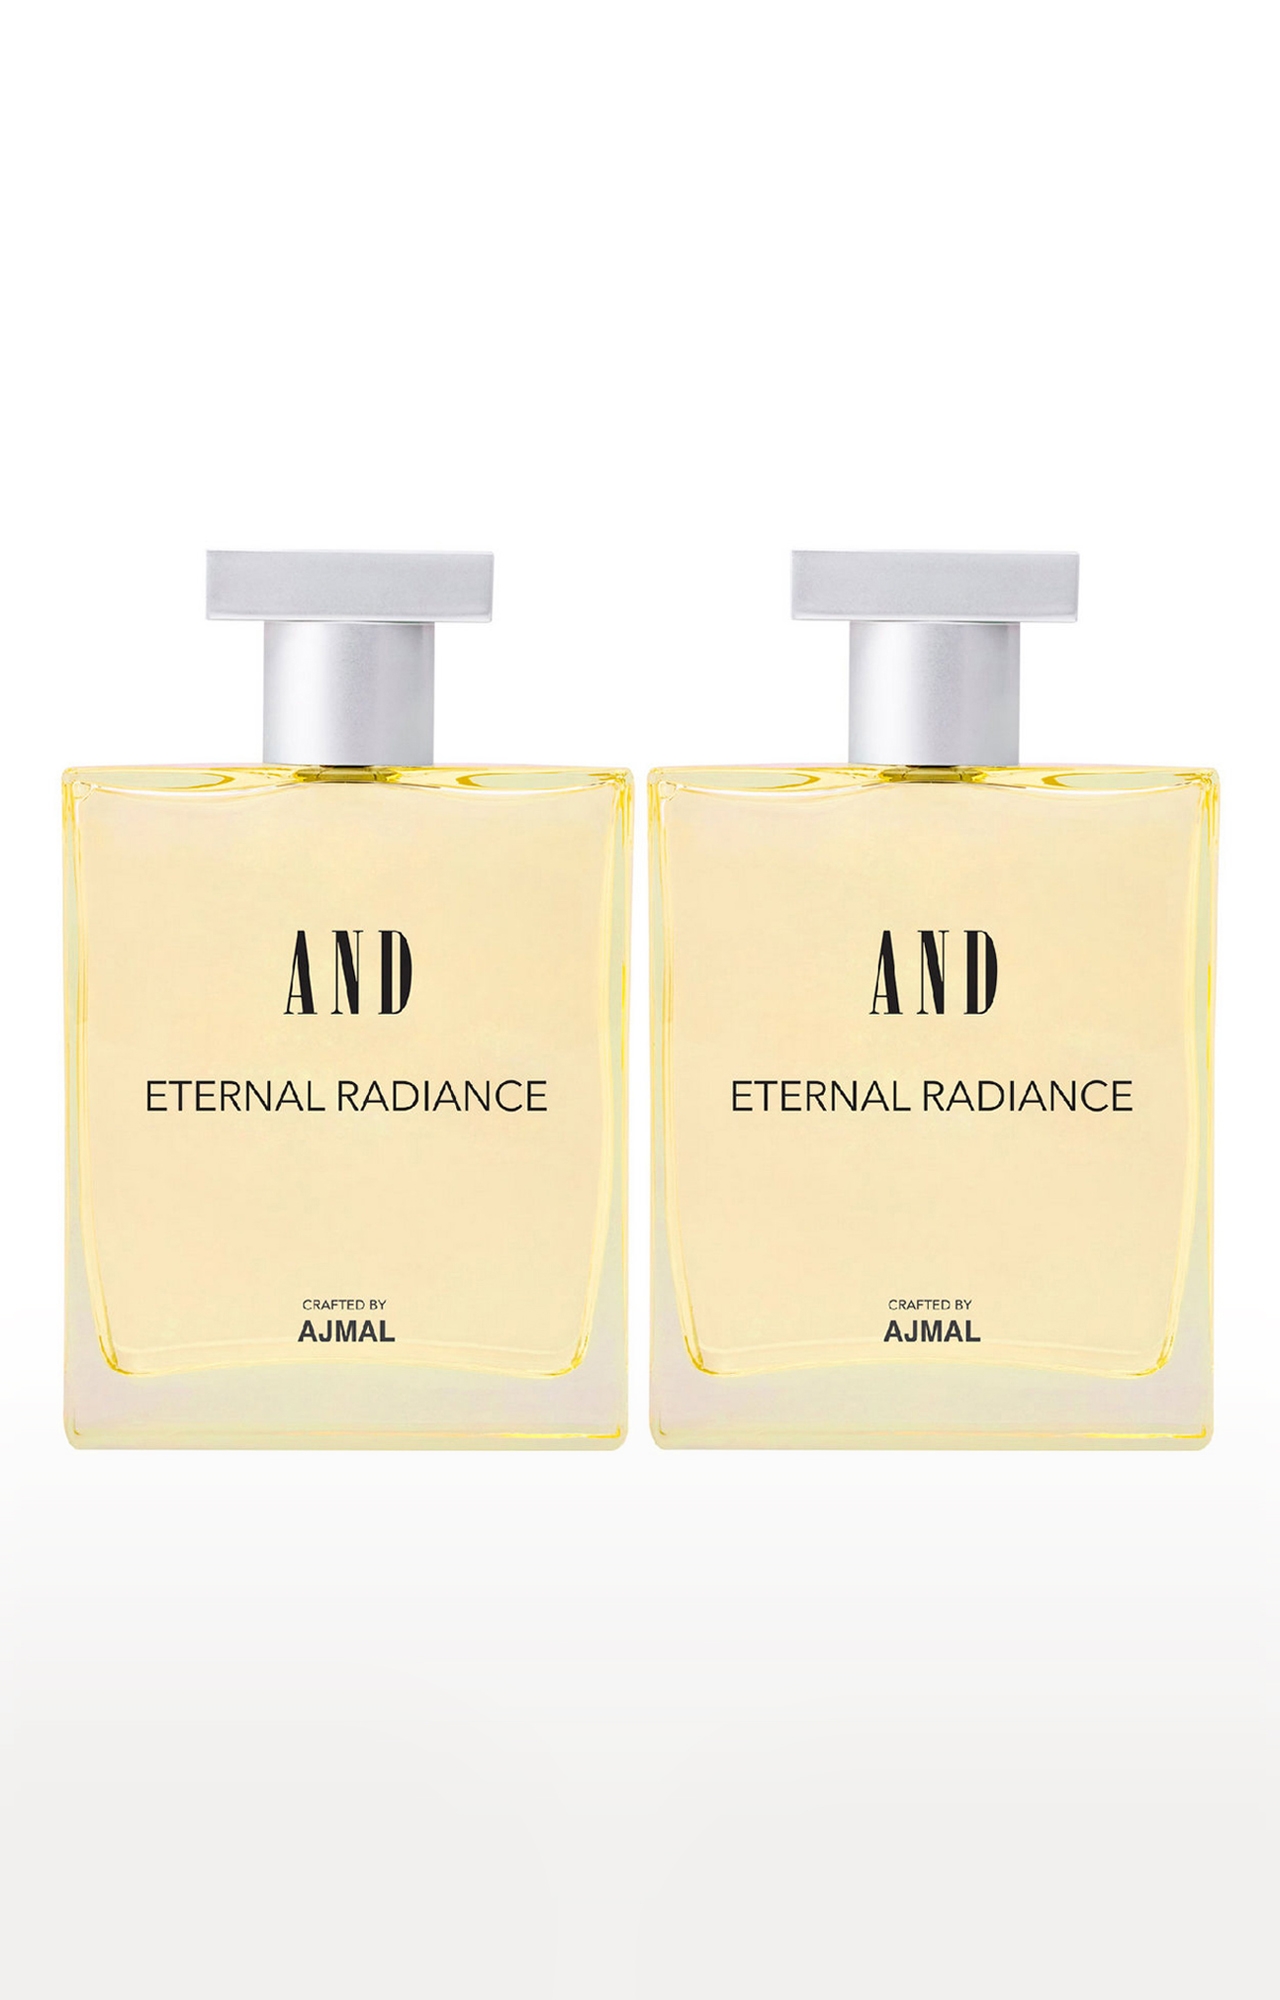 AND Crafted By Ajmal | AND Eternal Radiance Pack of 2 Eau De Parfum 50ML each for Women Crafted by Ajmal  0